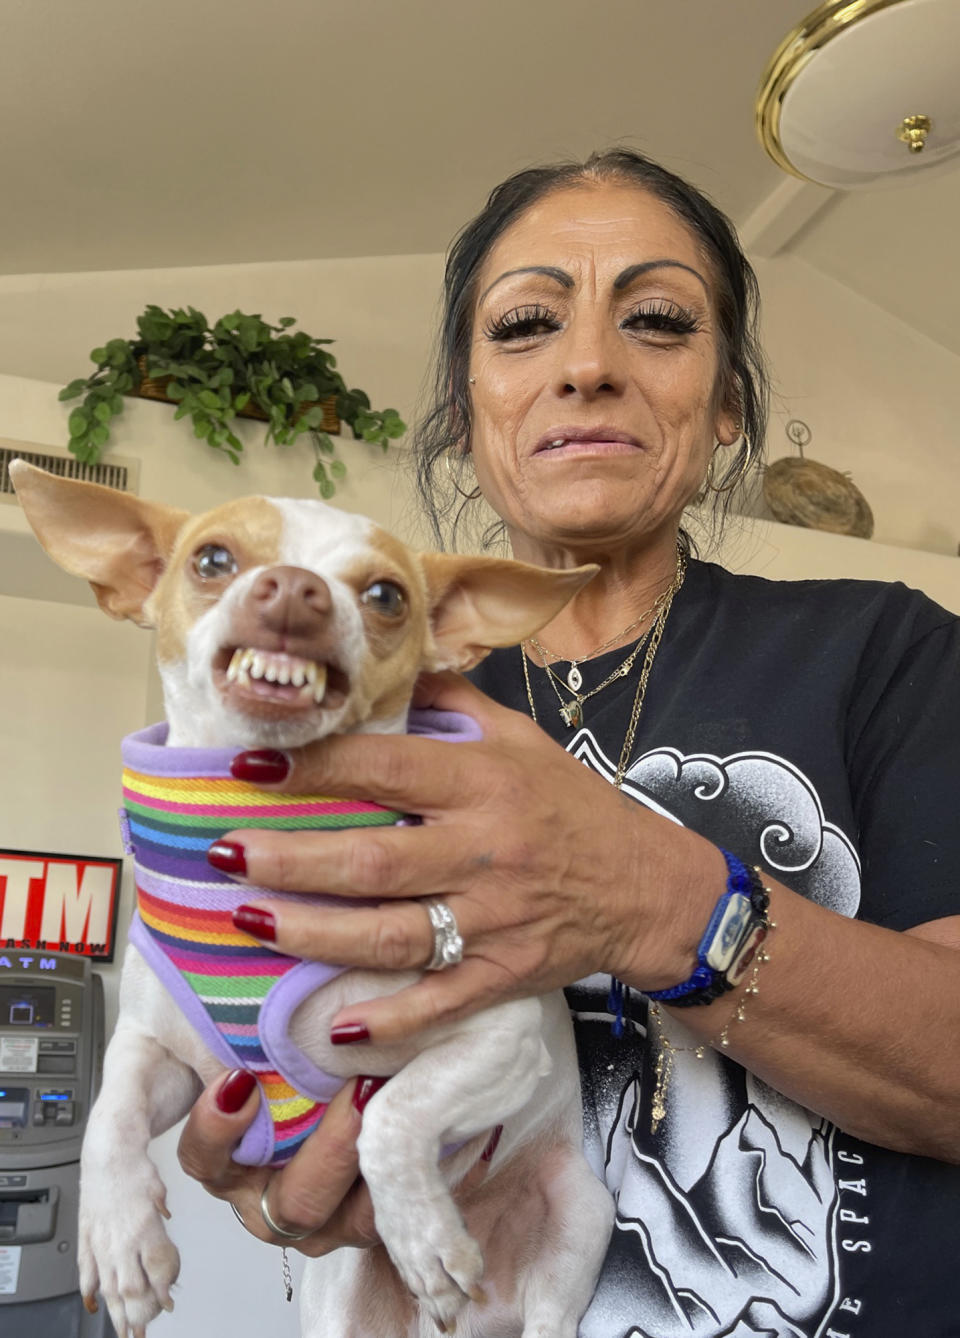 Angelita Saldaña shows off her pet Chihuahua Gaspar at a homeless shelter for older people in Phoenix, Arizona, Wednesday, Nov. 28, 2023. She says she trained the little dog to show his teeth on command. Saldaña says she ended up homeless when her marriage ended and for months slept in her truck in parking lots around the Phoenix area. She said her $941 monthly disability check isn't enough to pay for even a studio apartment in the area, where rents start at around $1,200. (AP Photo/Anita Snow)